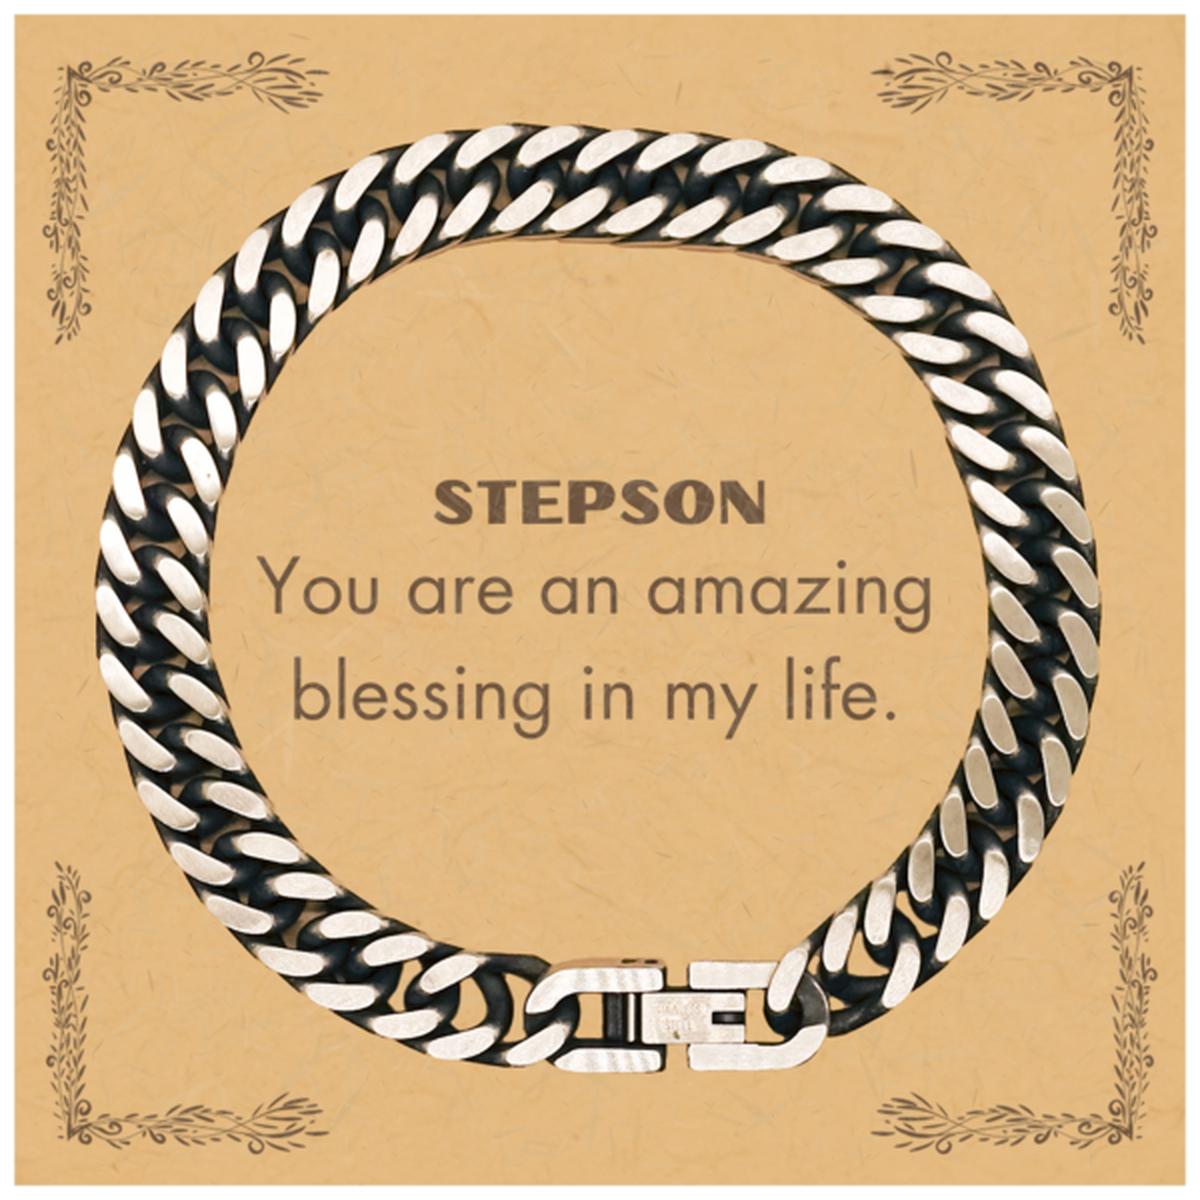 Stepson Cuban Link Chain Bracelet, You are an amazing blessing in my life, Thank You Gifts For Stepson, Inspirational Birthday Christmas Unique Gifts For Stepson